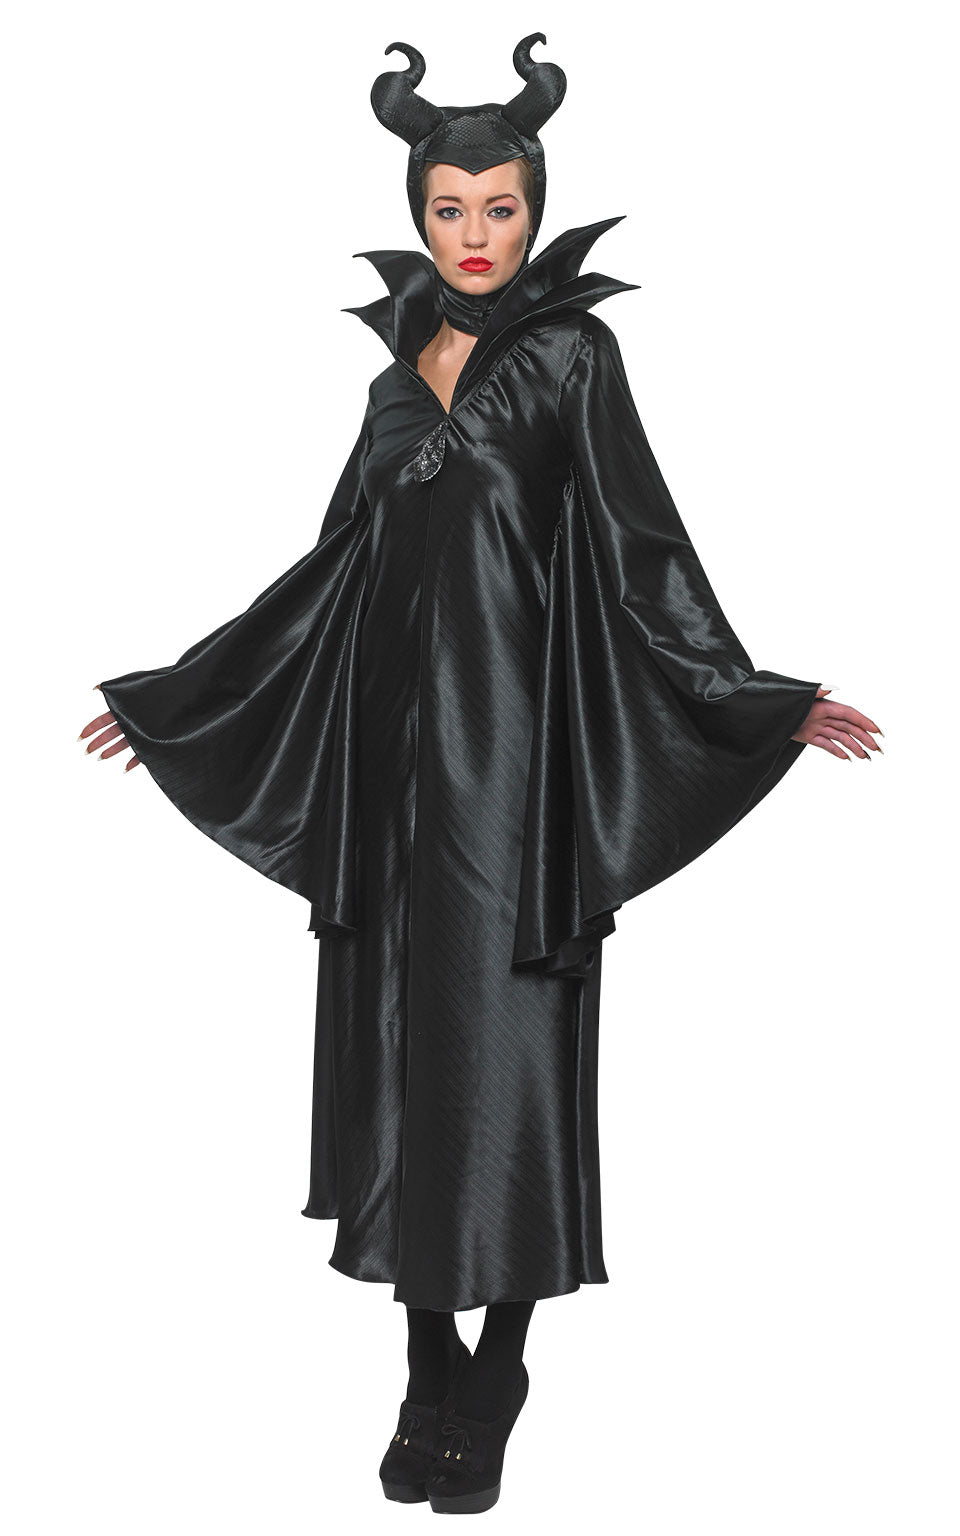 MALEFICENT DELUXE ADULT COSTUME - SIZE L